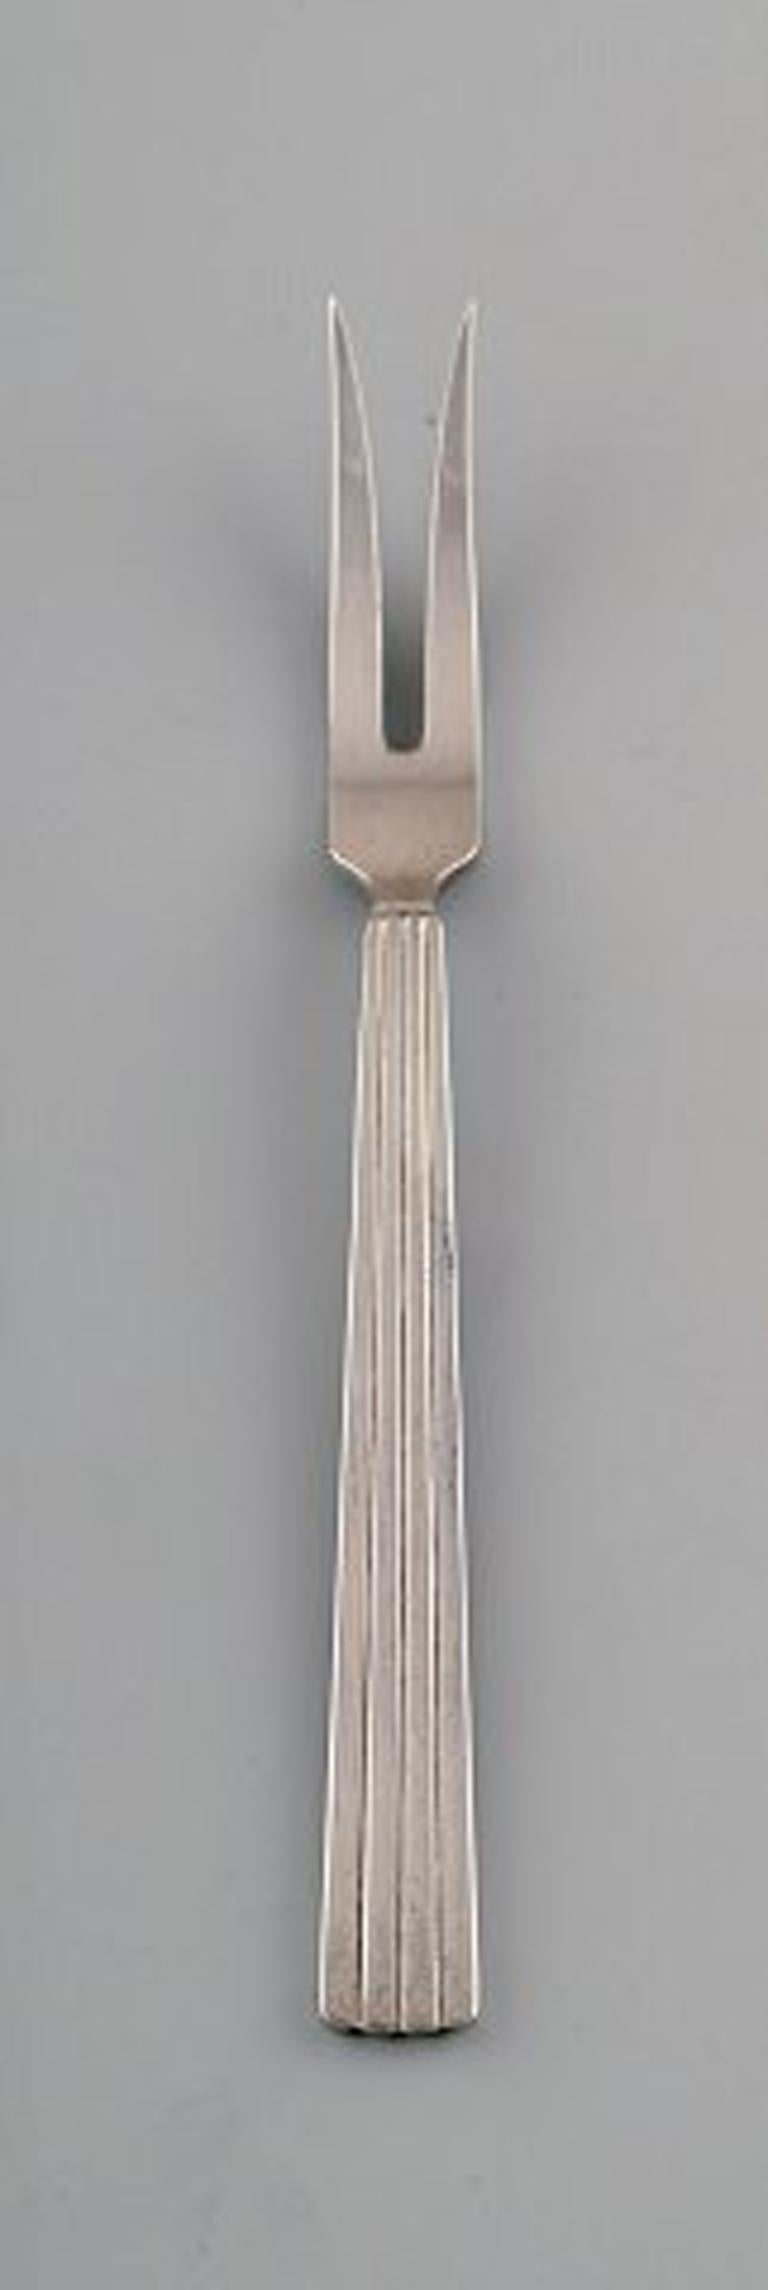 Georg Jensen Sterling Silver Bernadotte. A set of 4 herring forks.
Measures: 11.5 cm.
In very good condition.
Early stamp. Swedish import stamp, 1930 s
The elegant cutlery Bernadotte was designed by the Swedish designer and king's son Sigvard